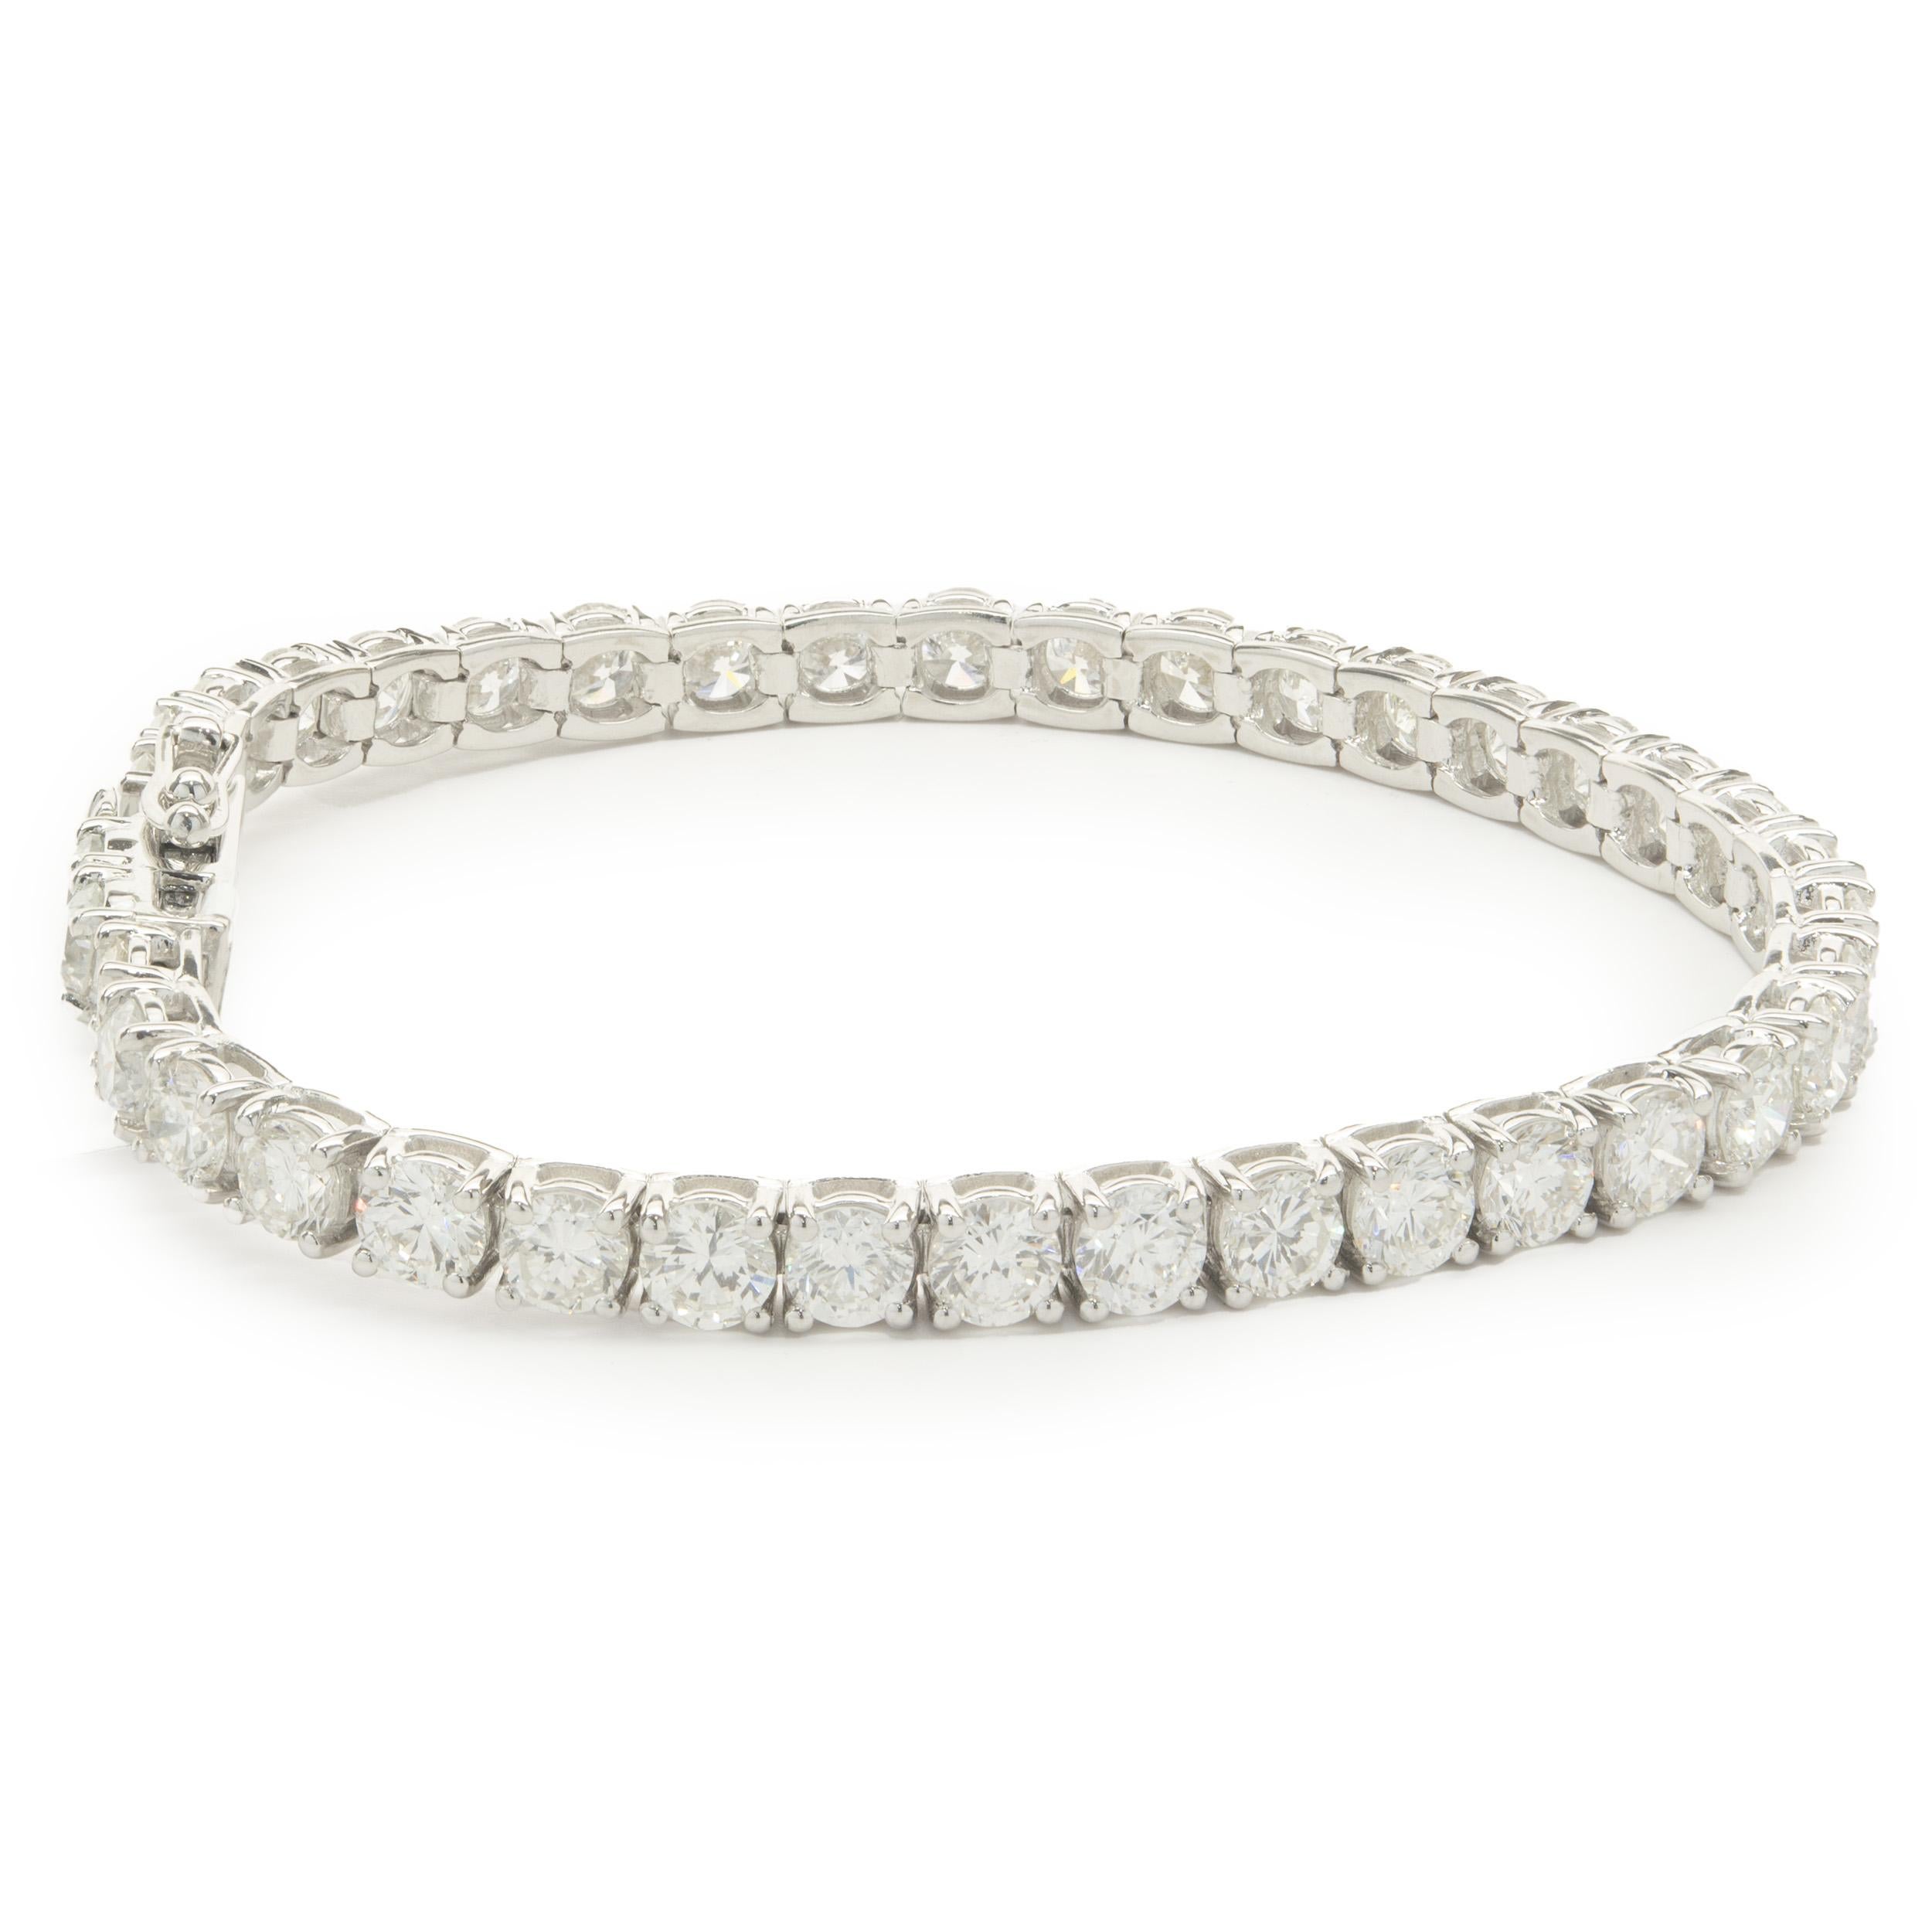 Material: 18K white gold
Diamonds: 39 round brilliant cut = 12.10cttw
Color: G / H / I
Clarity: VS2-SI1
Dimensions: bracelet will fit up to a 7-inch wrist 
Weight: 18.31 grams